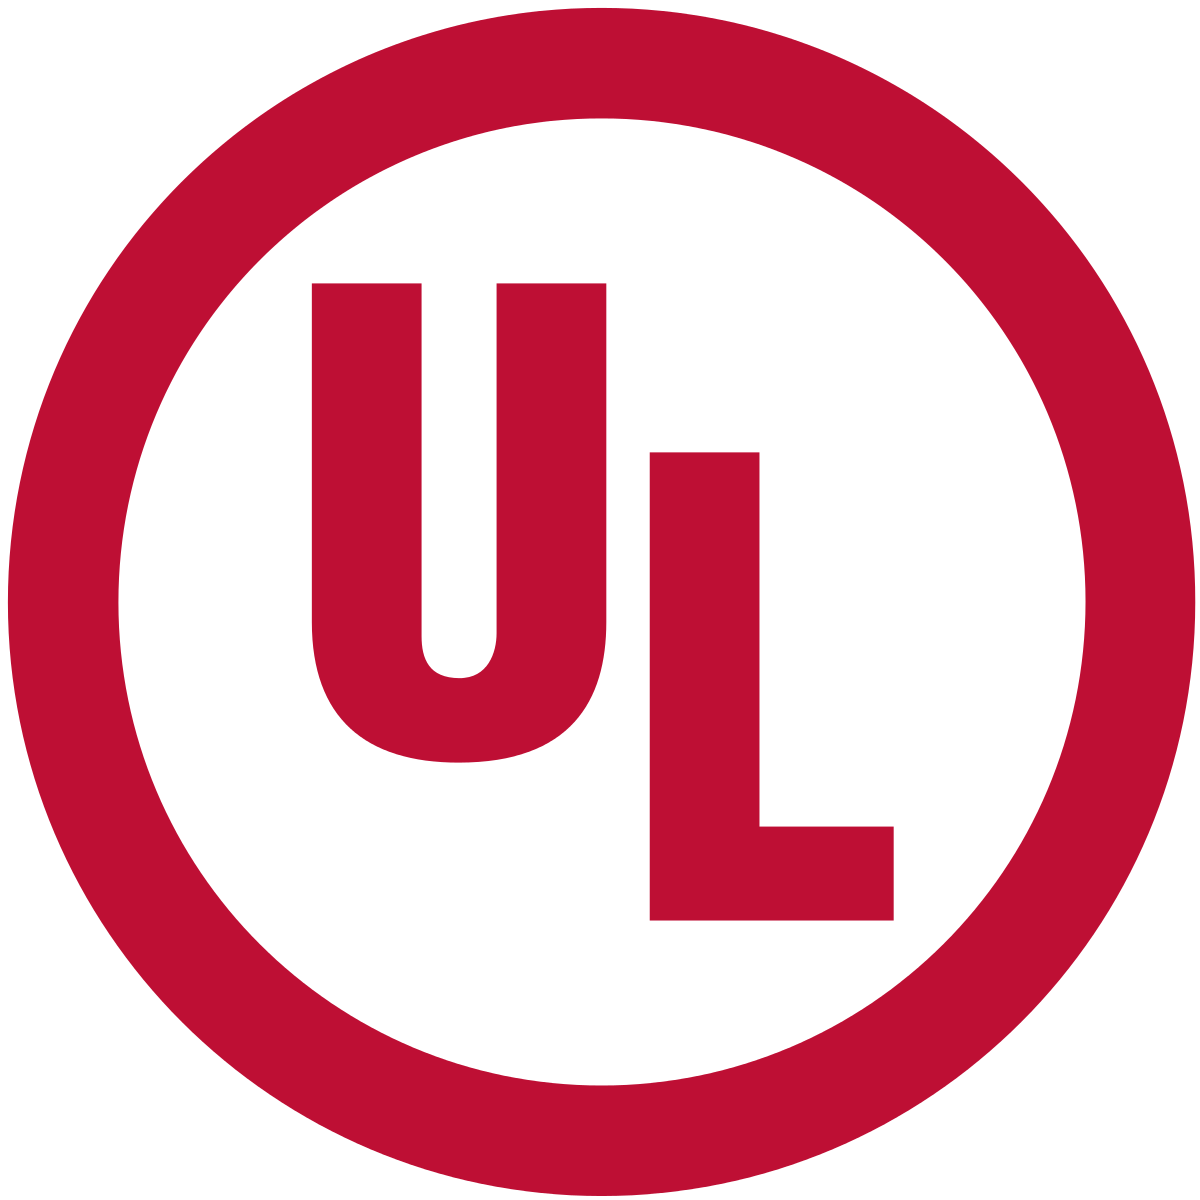 Red UL Label